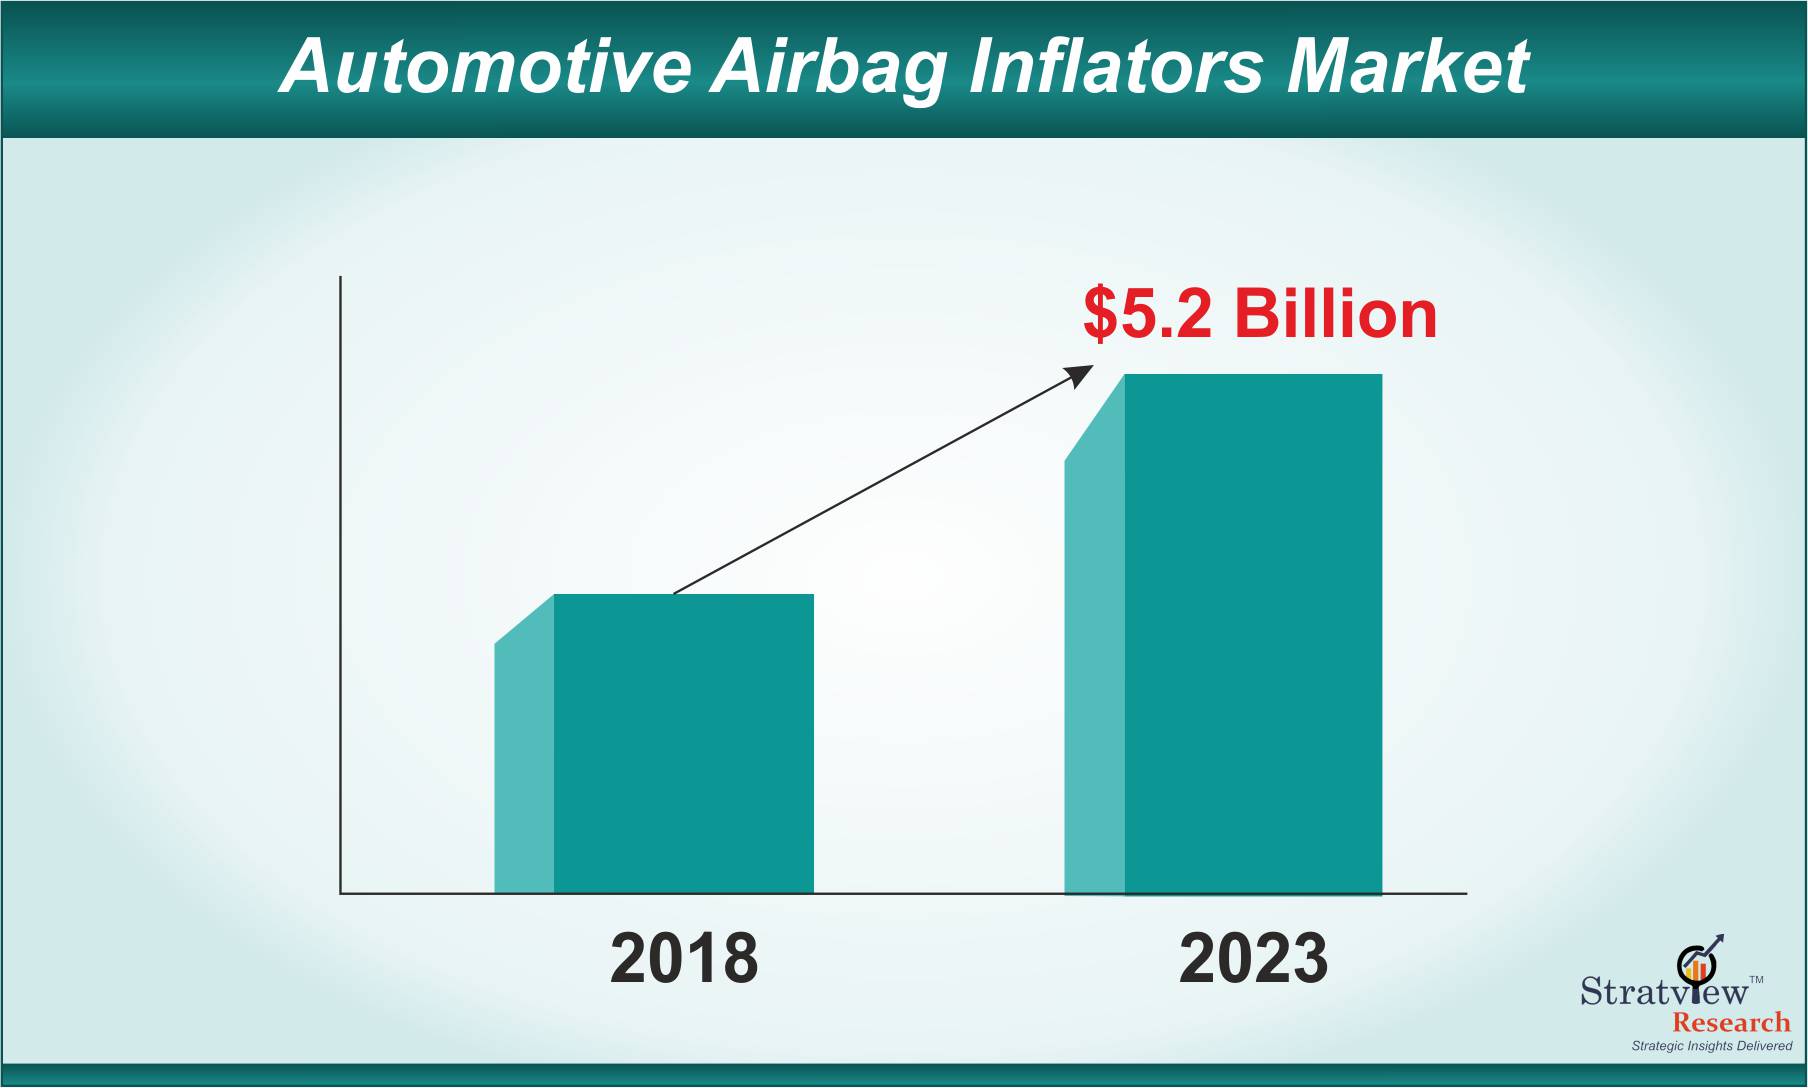 Automotive Airbag Inflators Market is Expected to Reach US$ 5.2 Billion by 2023